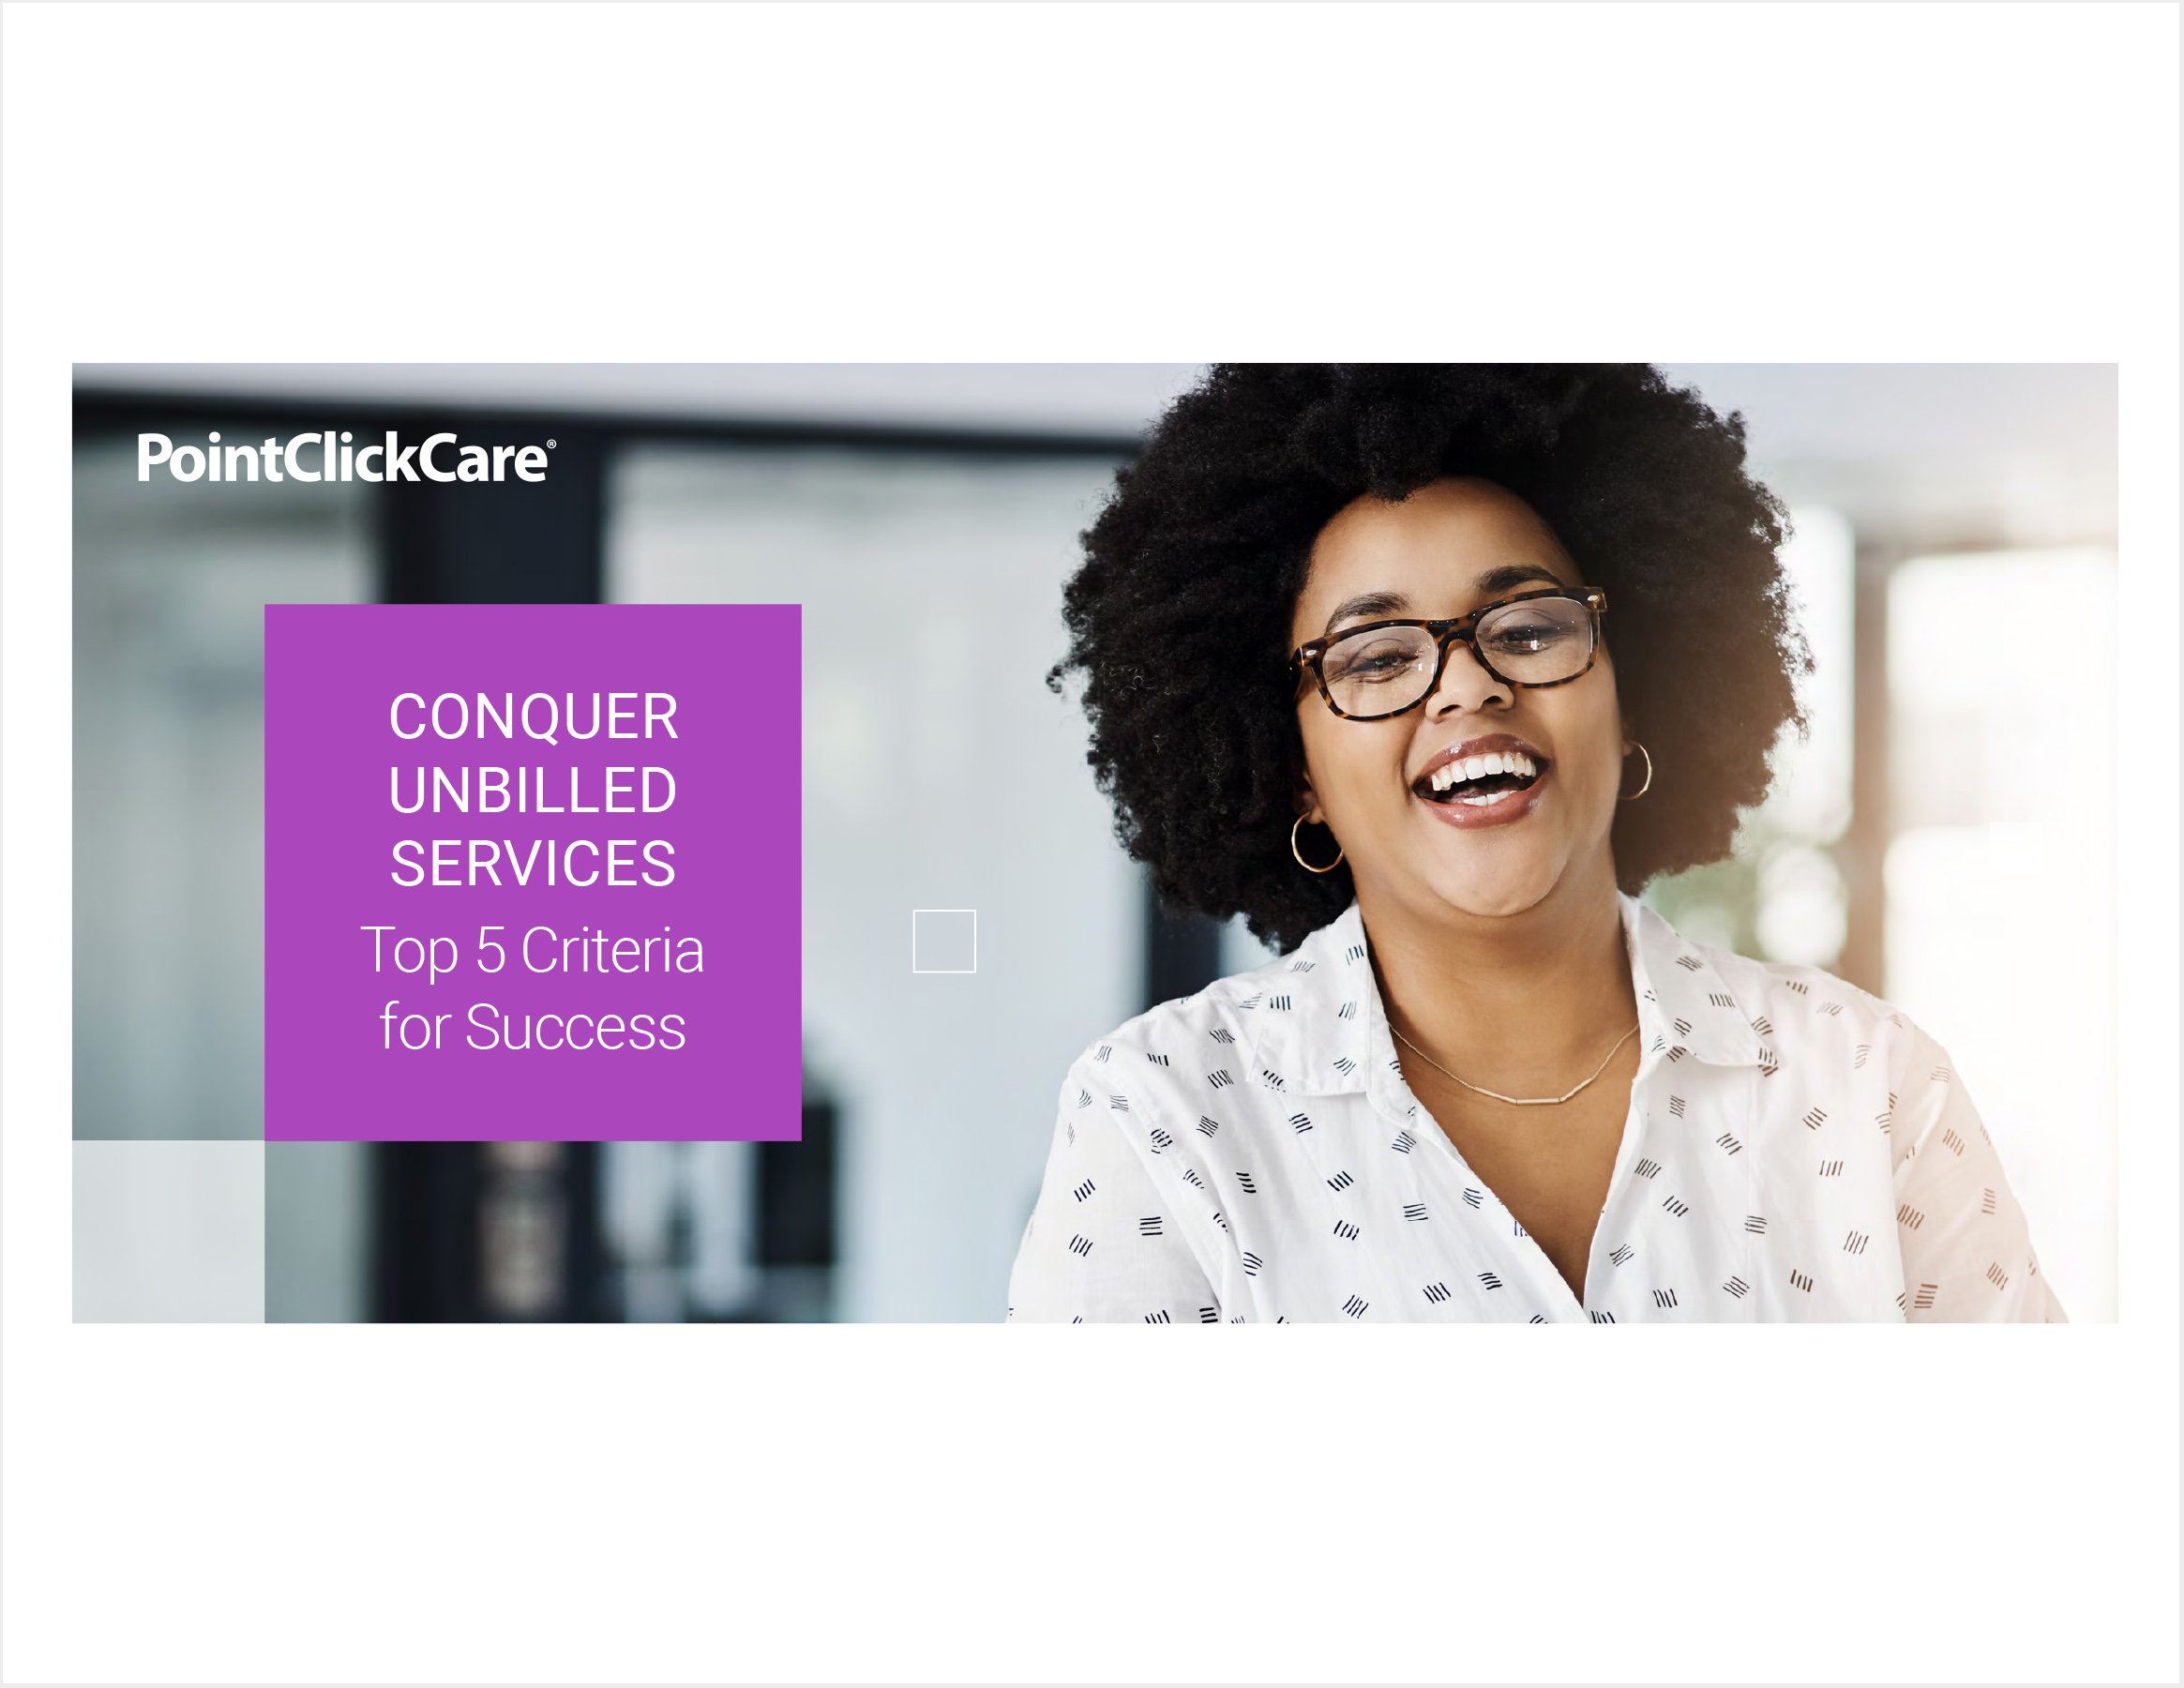 https://pointclickcare.com/wp-content/uploads/2021/07/conquer-unbilled-services-top-5-criteria-for-success-cover-pg